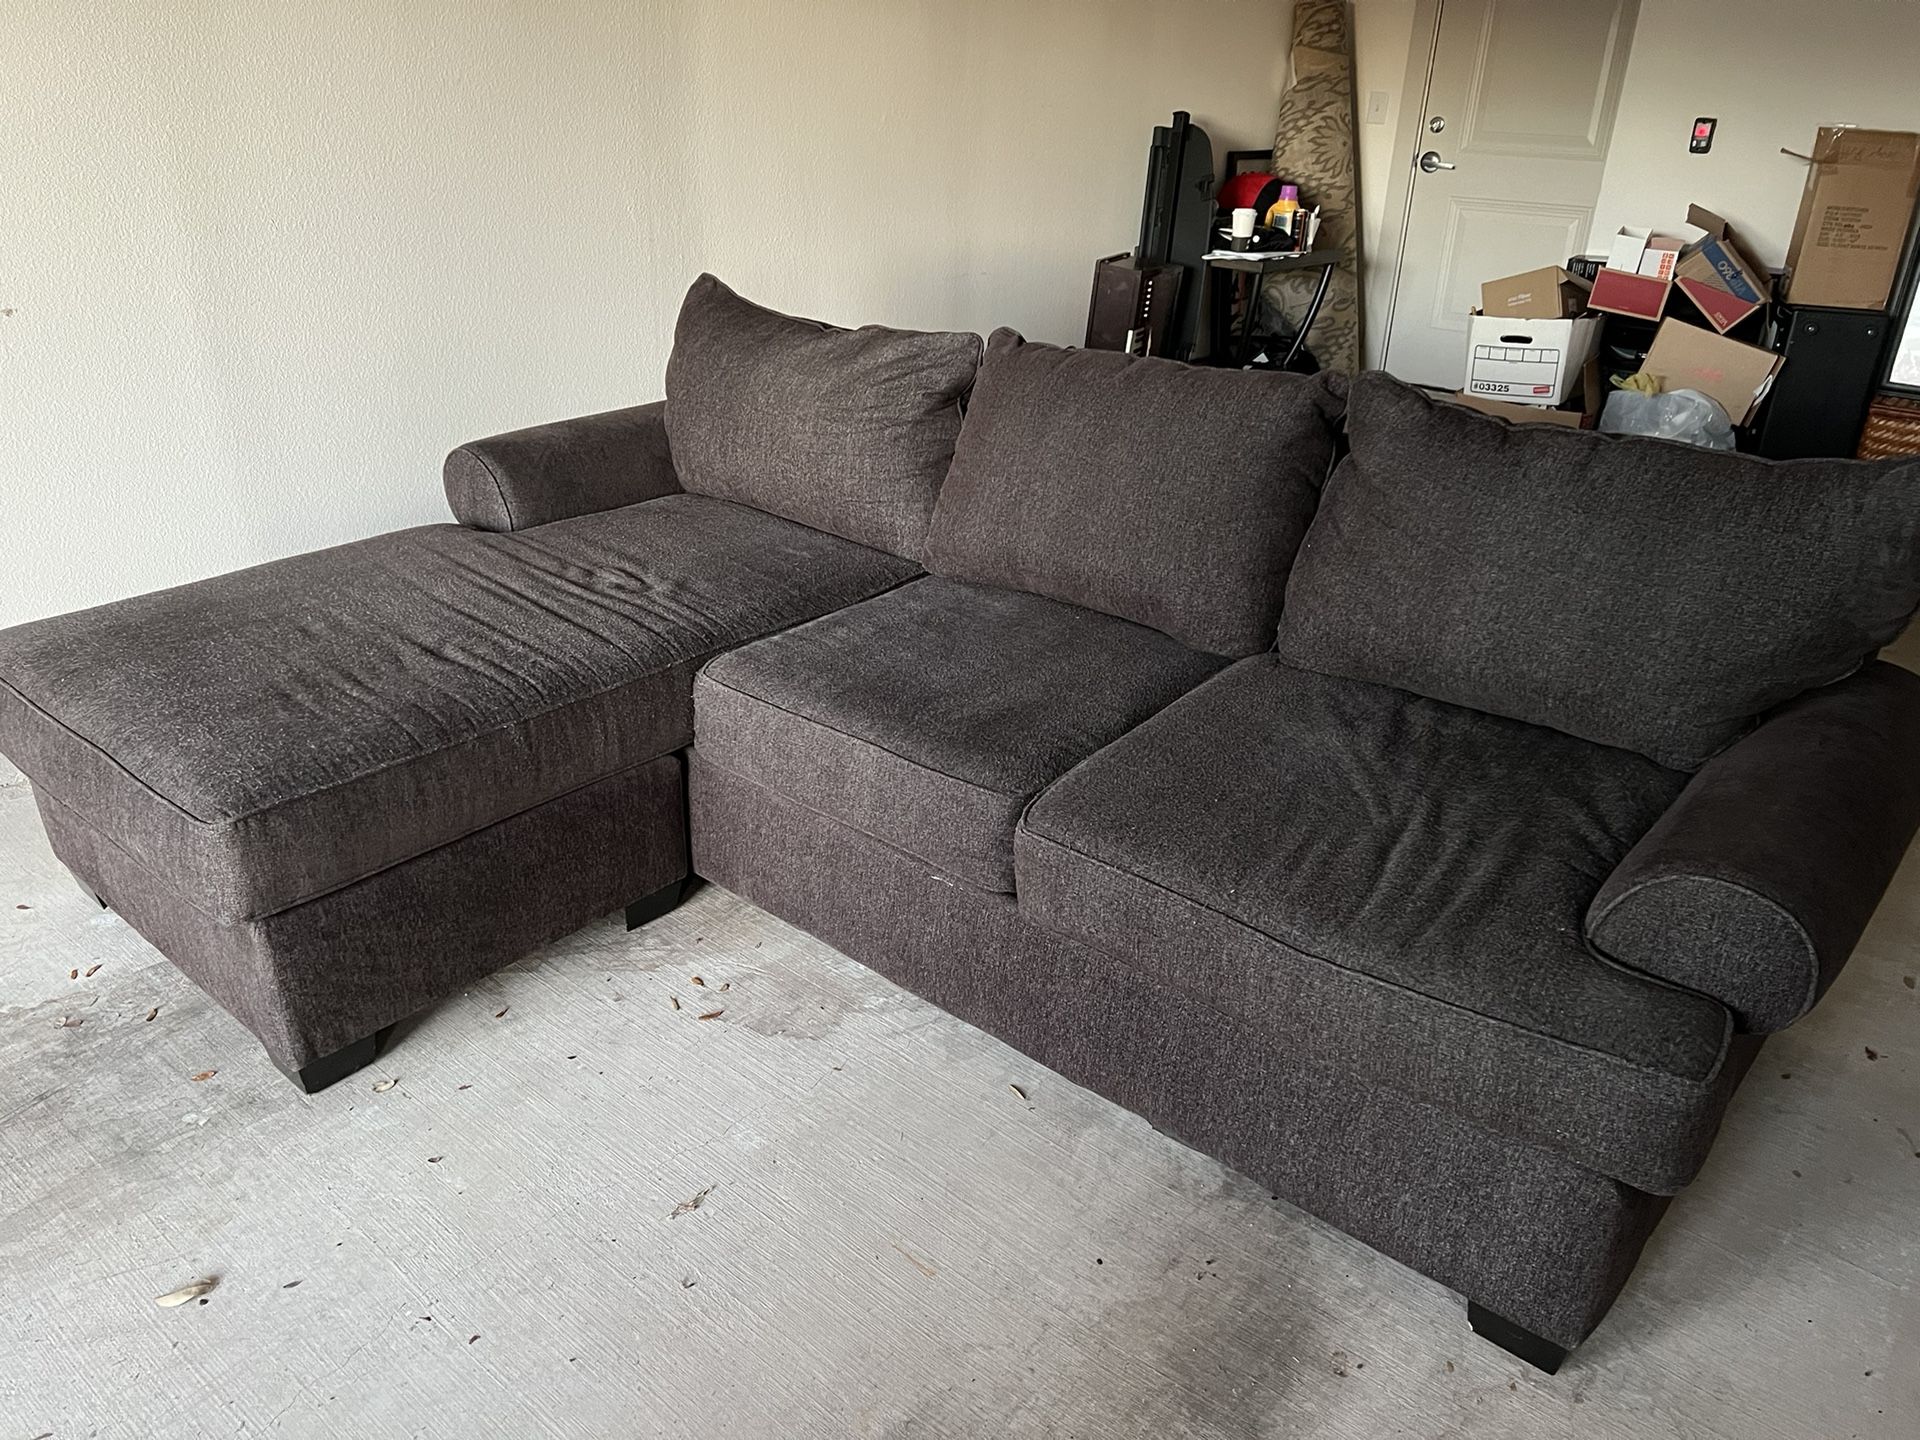 Beautiful L Shaped Sofa Marked Down To $250  From $700